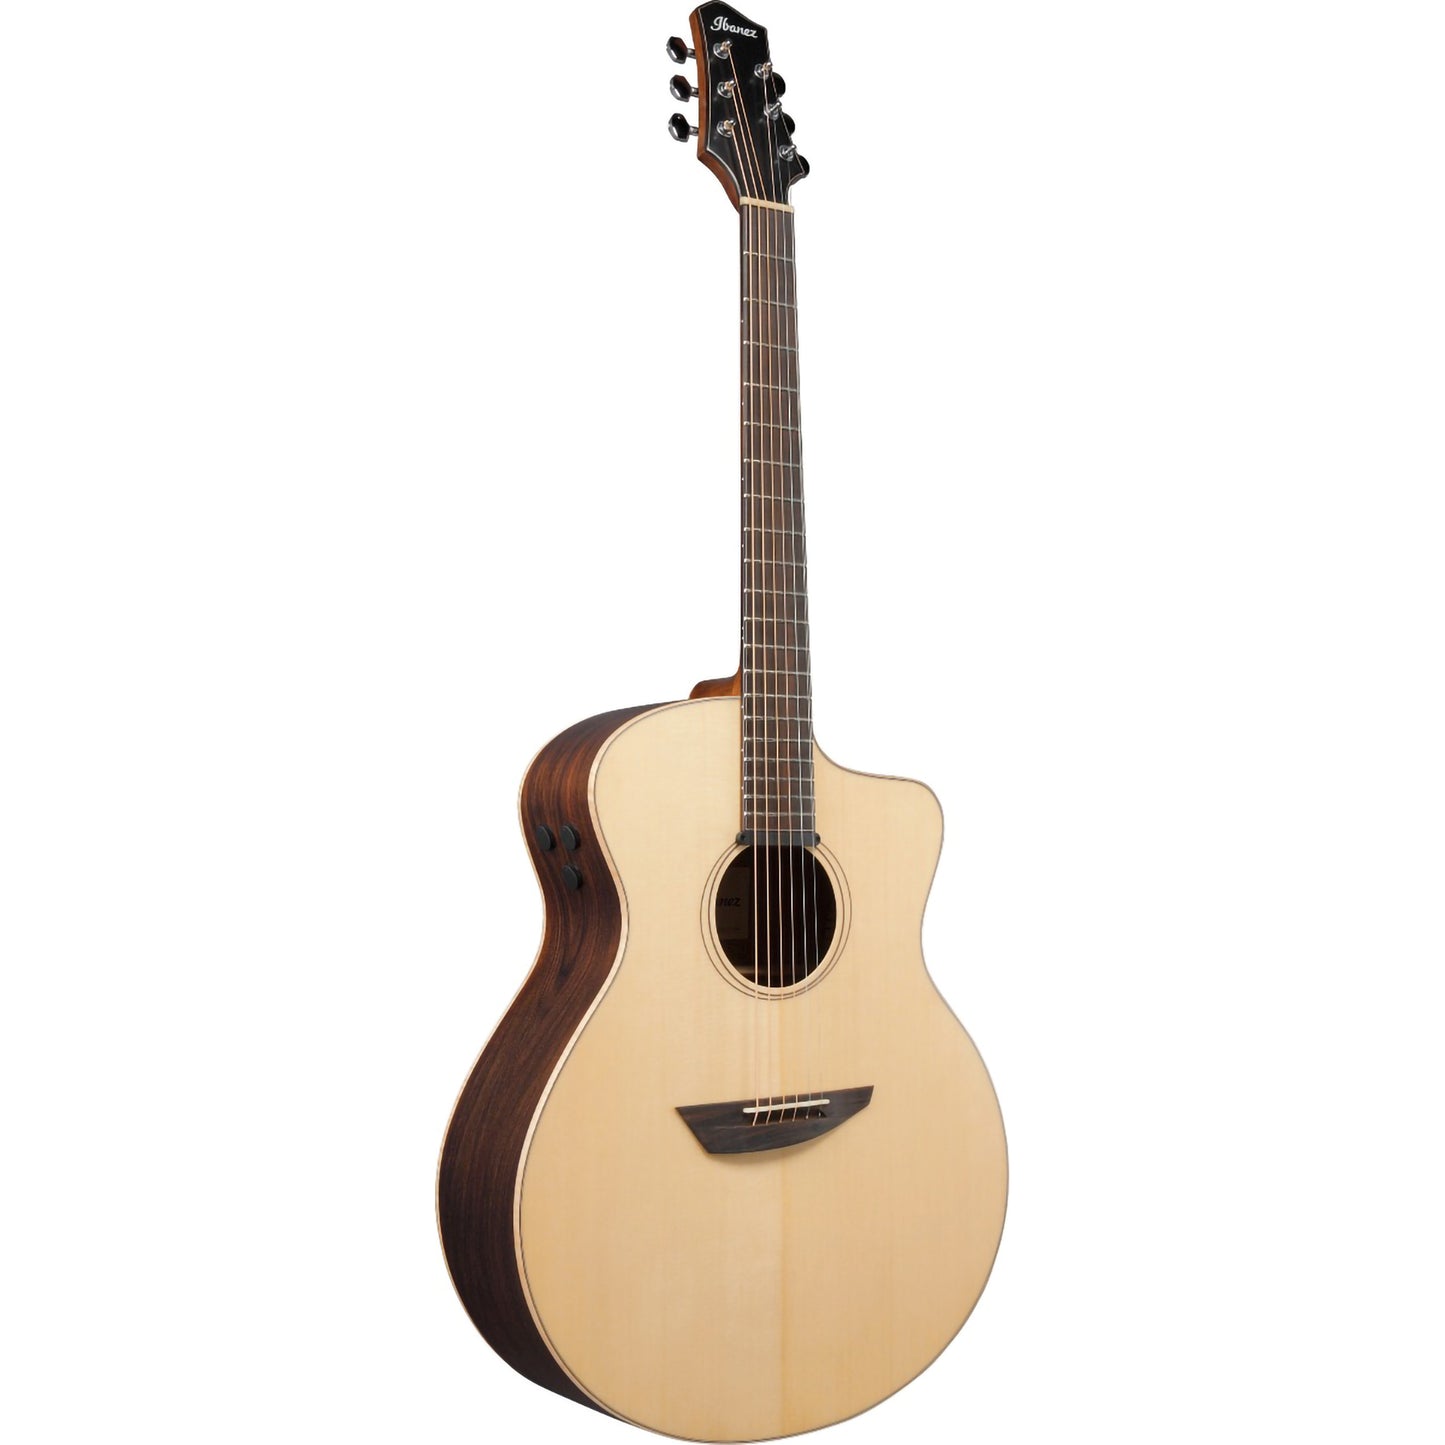 Ibanez PA300E Natural Top Acoustic Electric Guitar